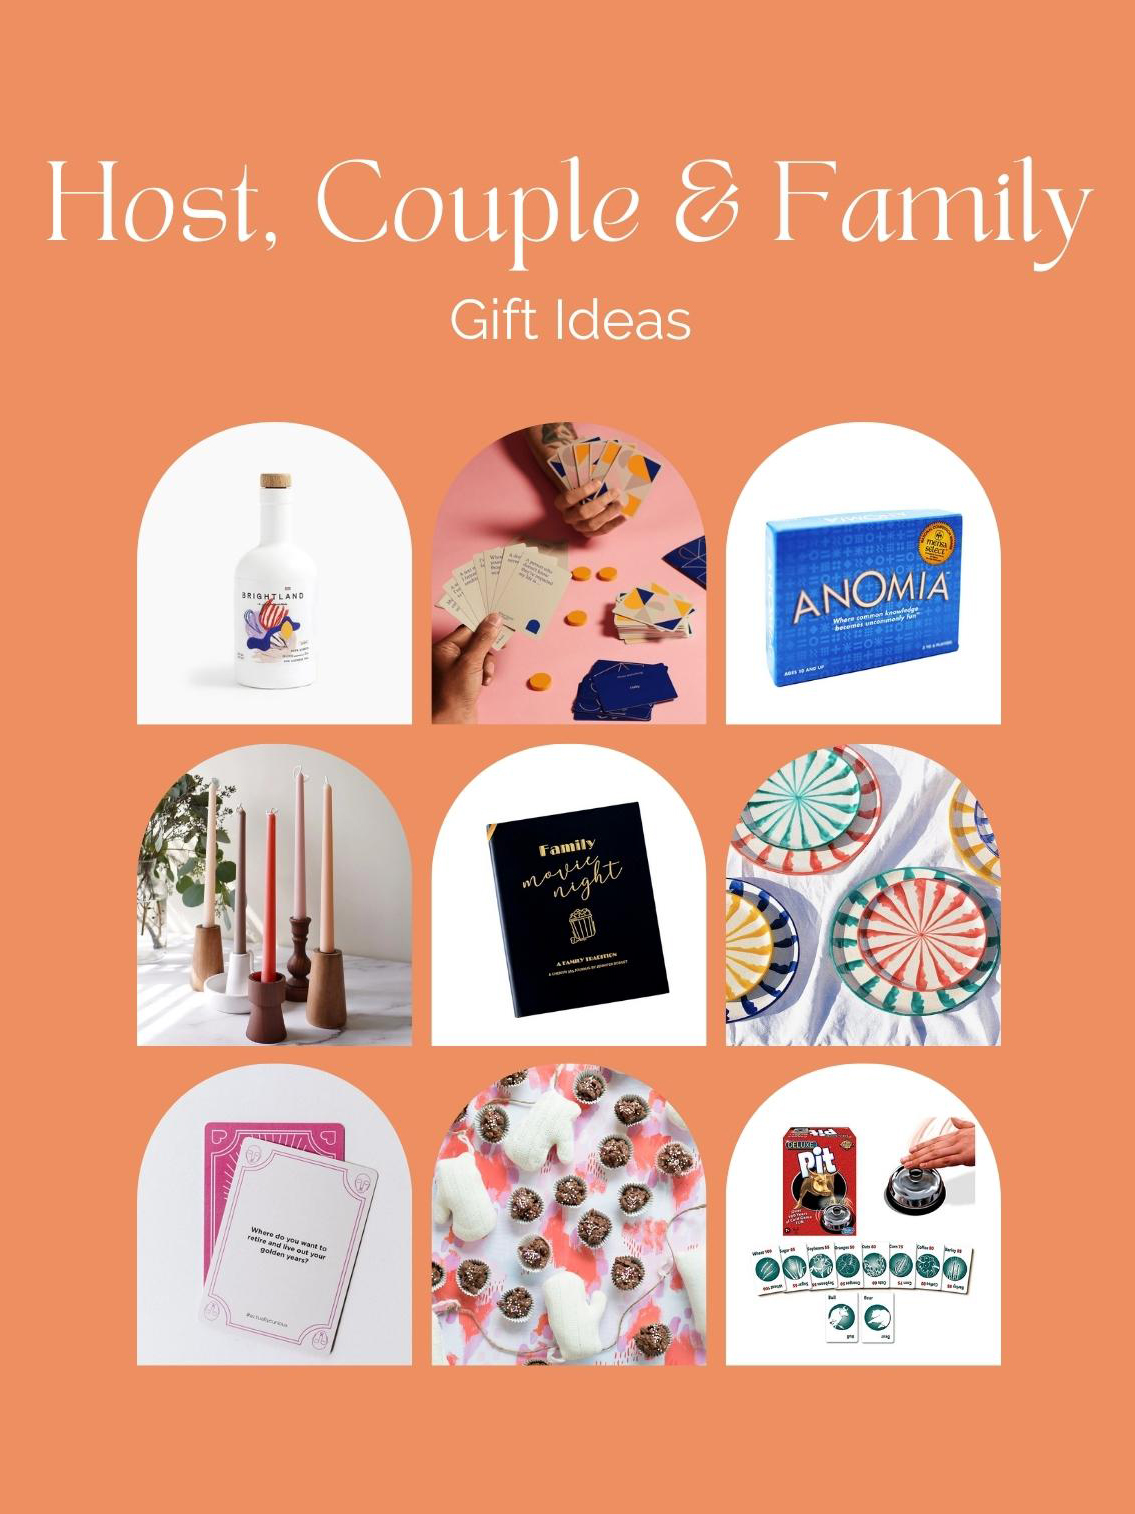 Gift Ideas for Hosts, Couples & Families - Studio DIY